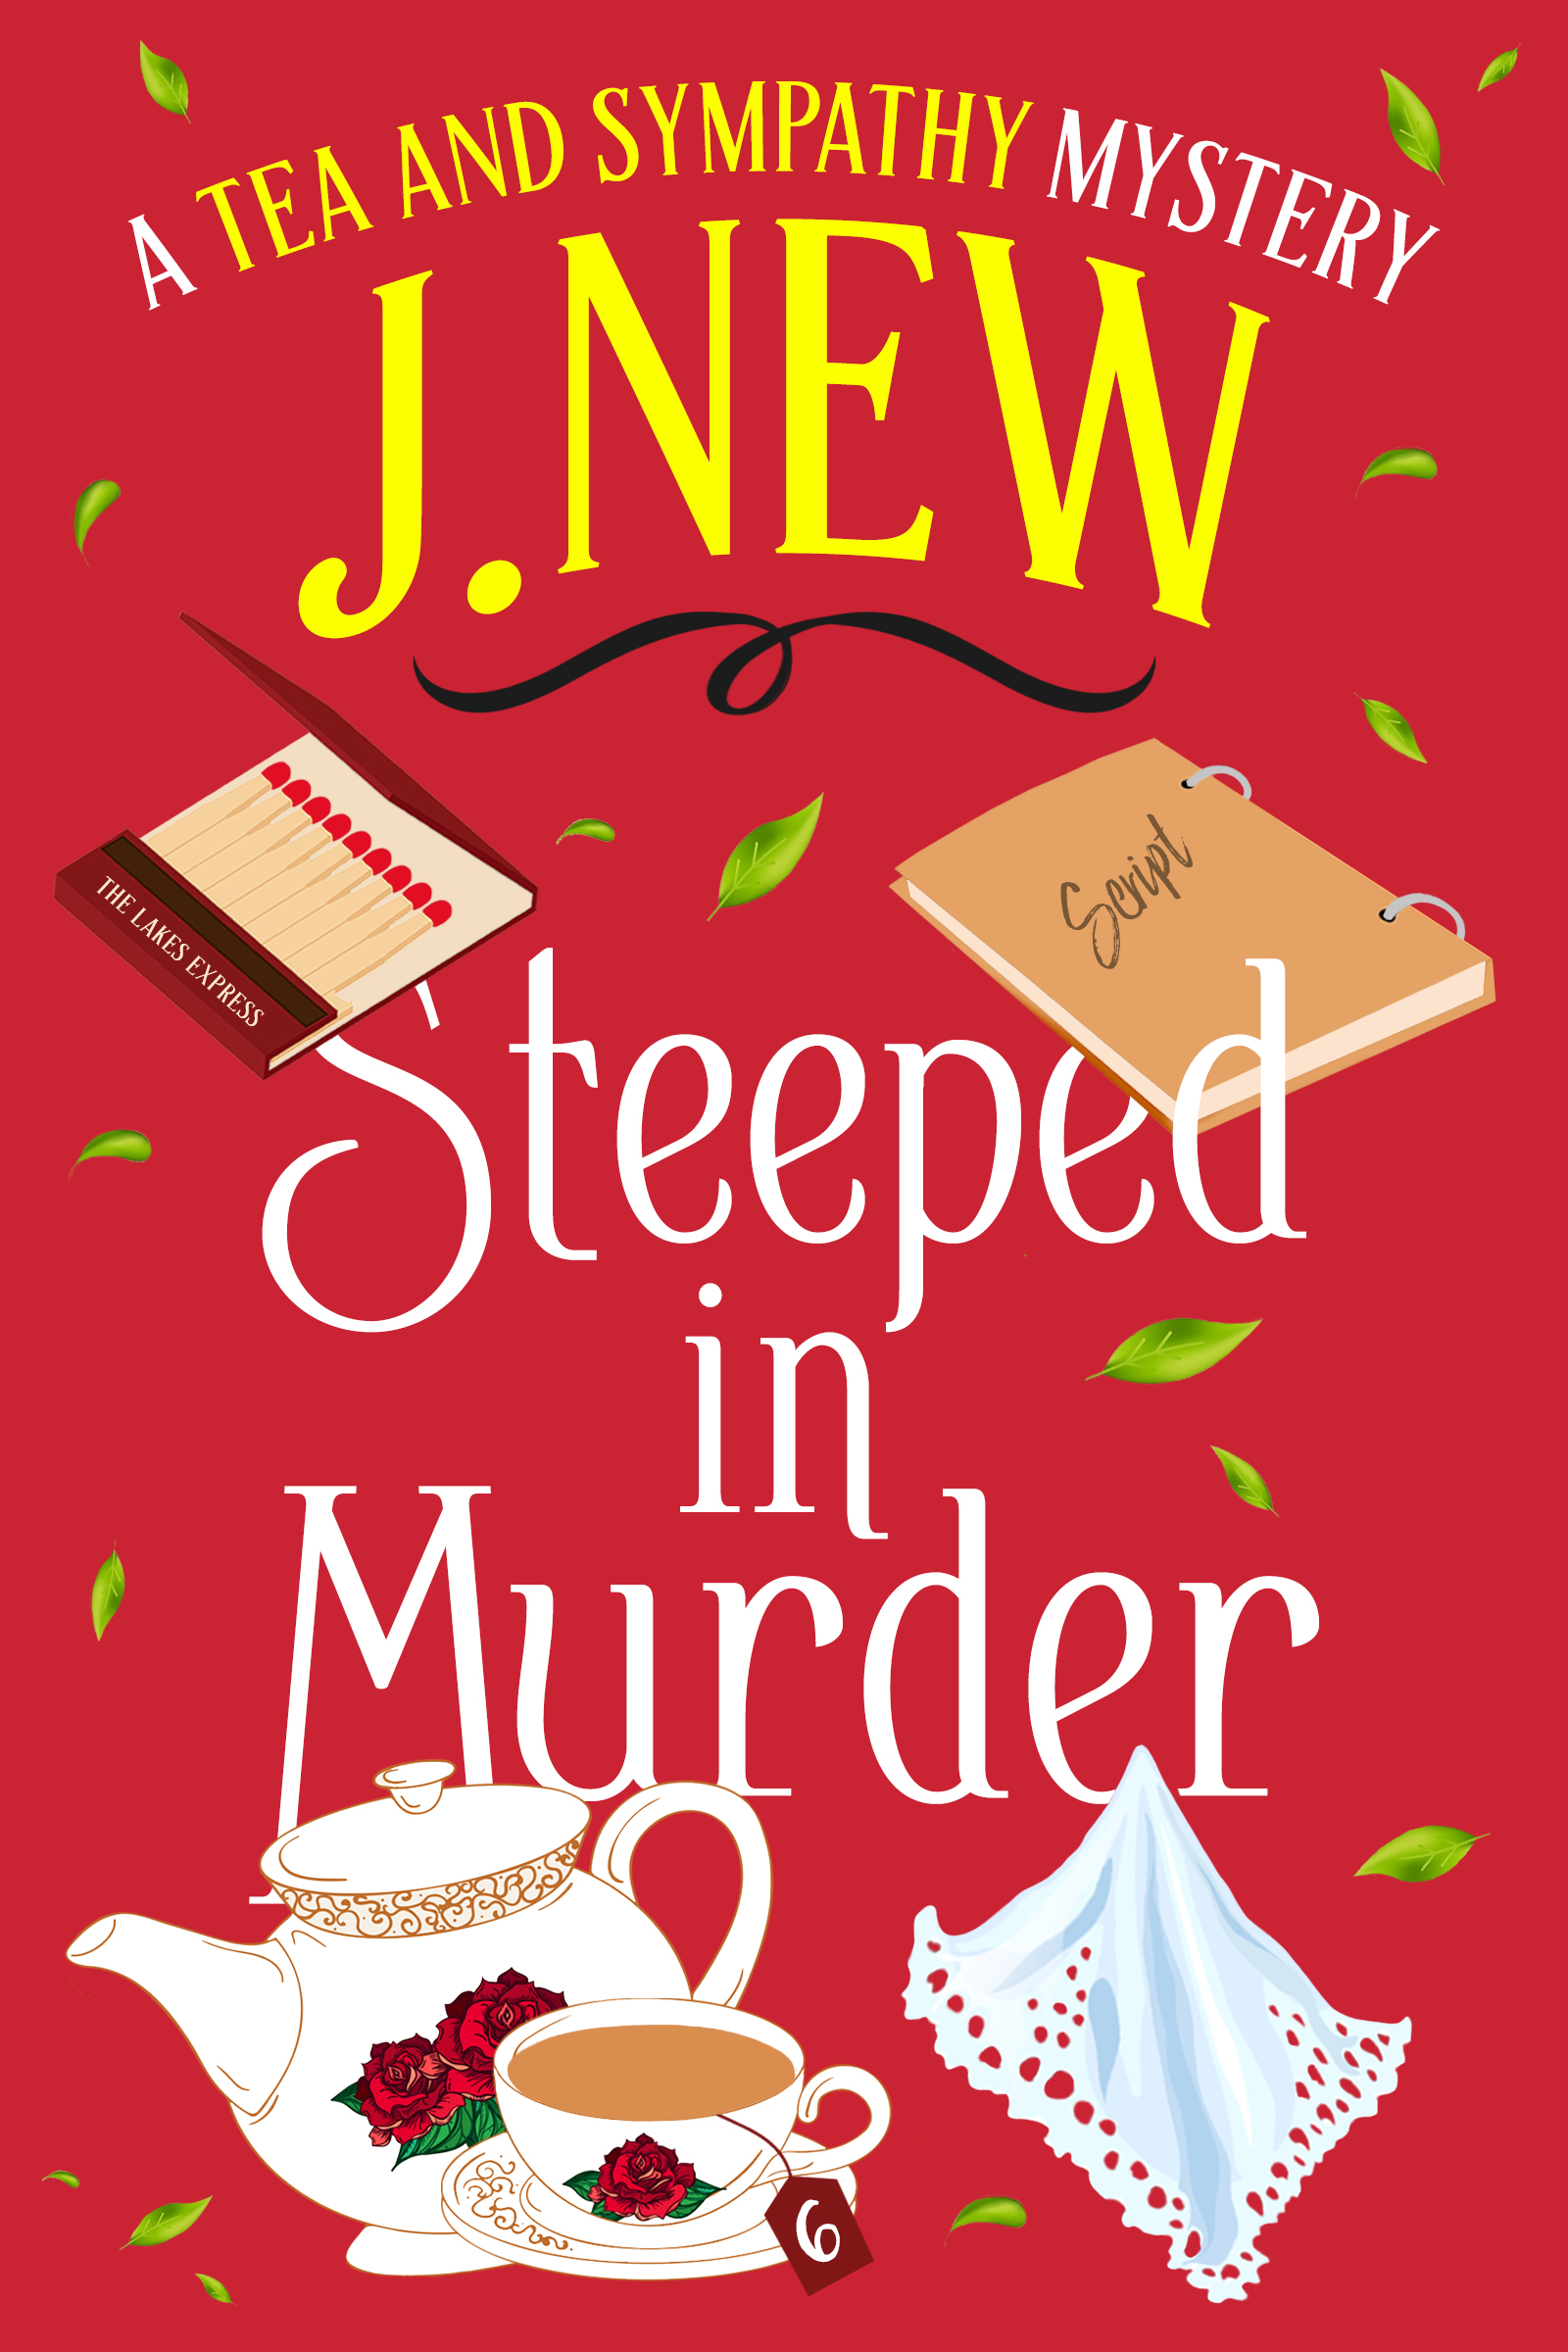 Steeped in Murder is the popular sixth book in the British cozy culinary mystery series by author J. New